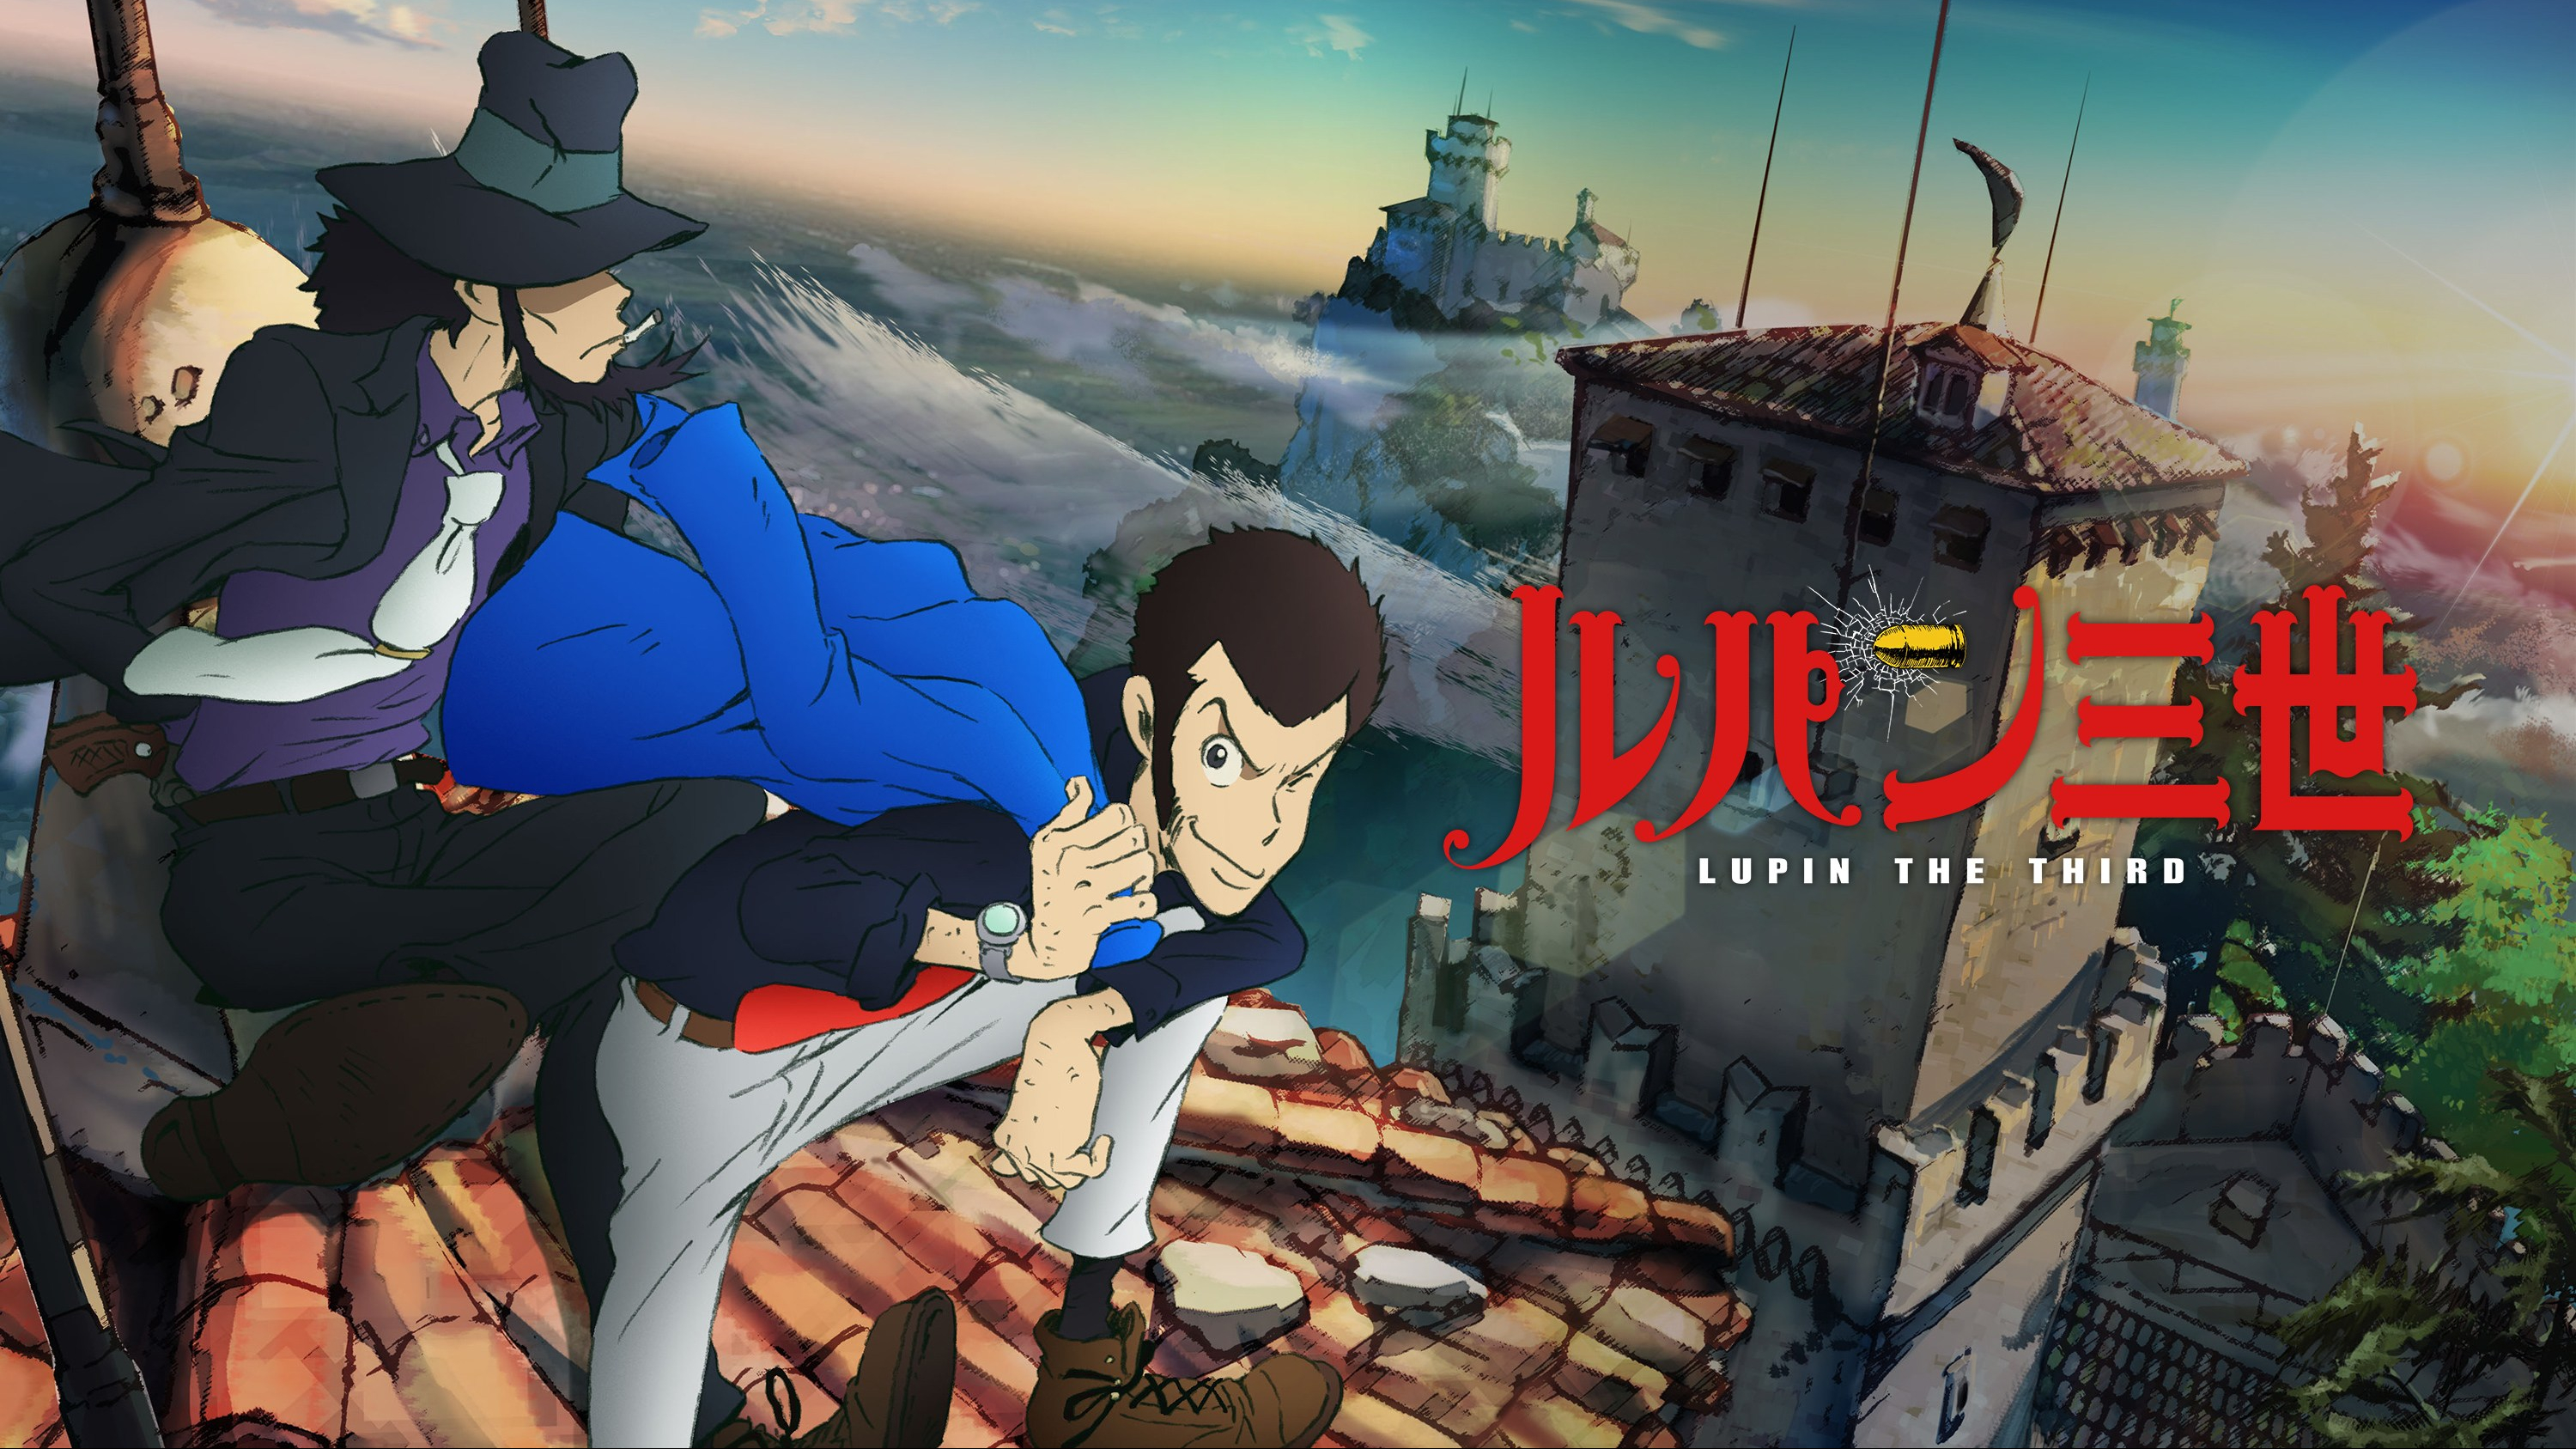 Promotional art for Lupin the Third Part IV